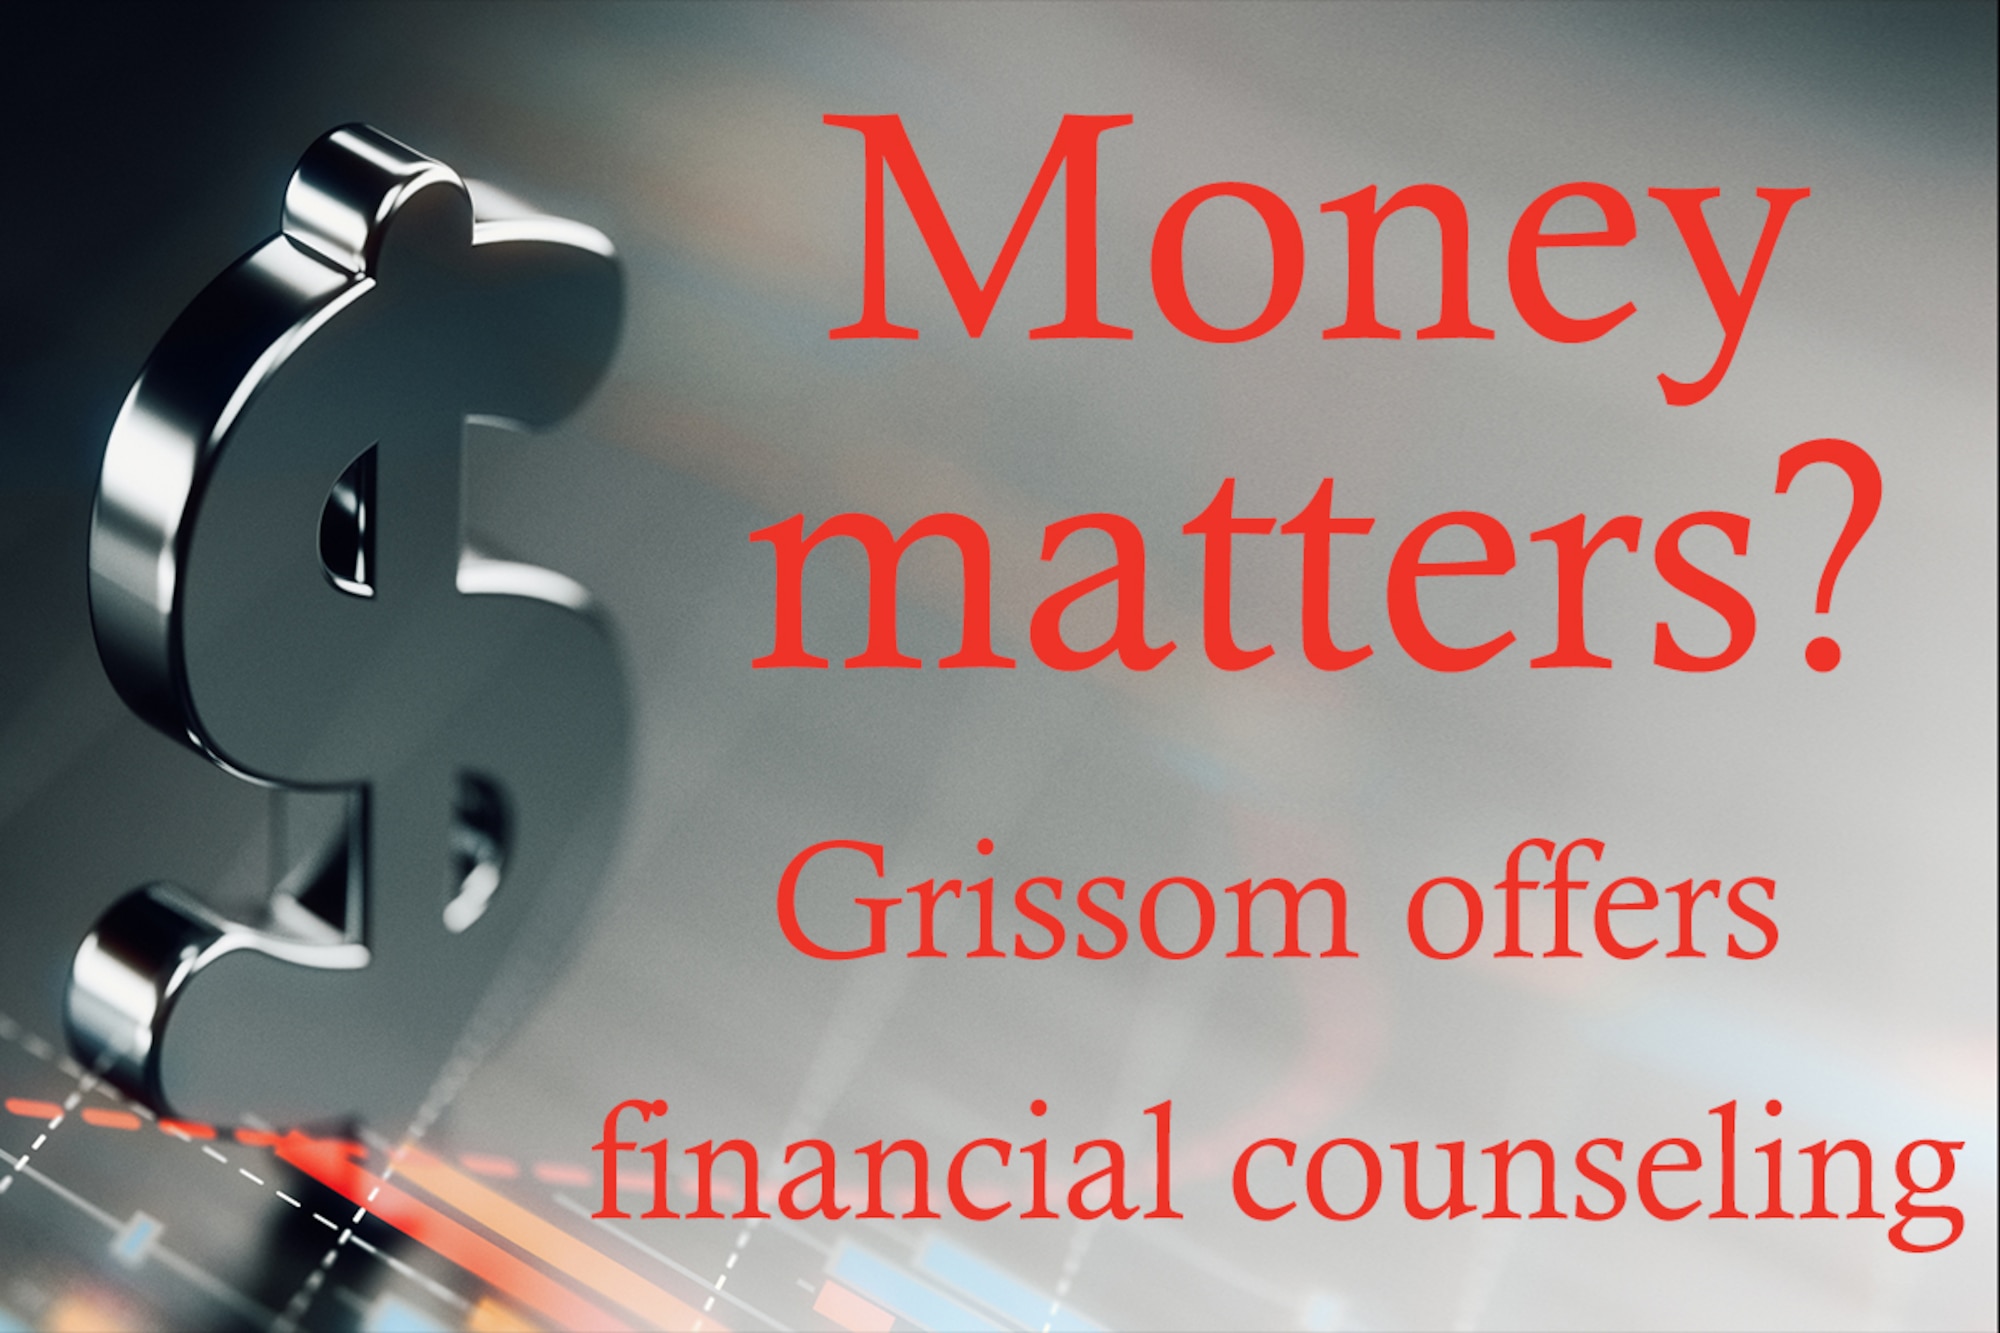 Grissom Airmen interested in financial counseling should contact the Airmen & Family Readiness center at 765-688-4812.